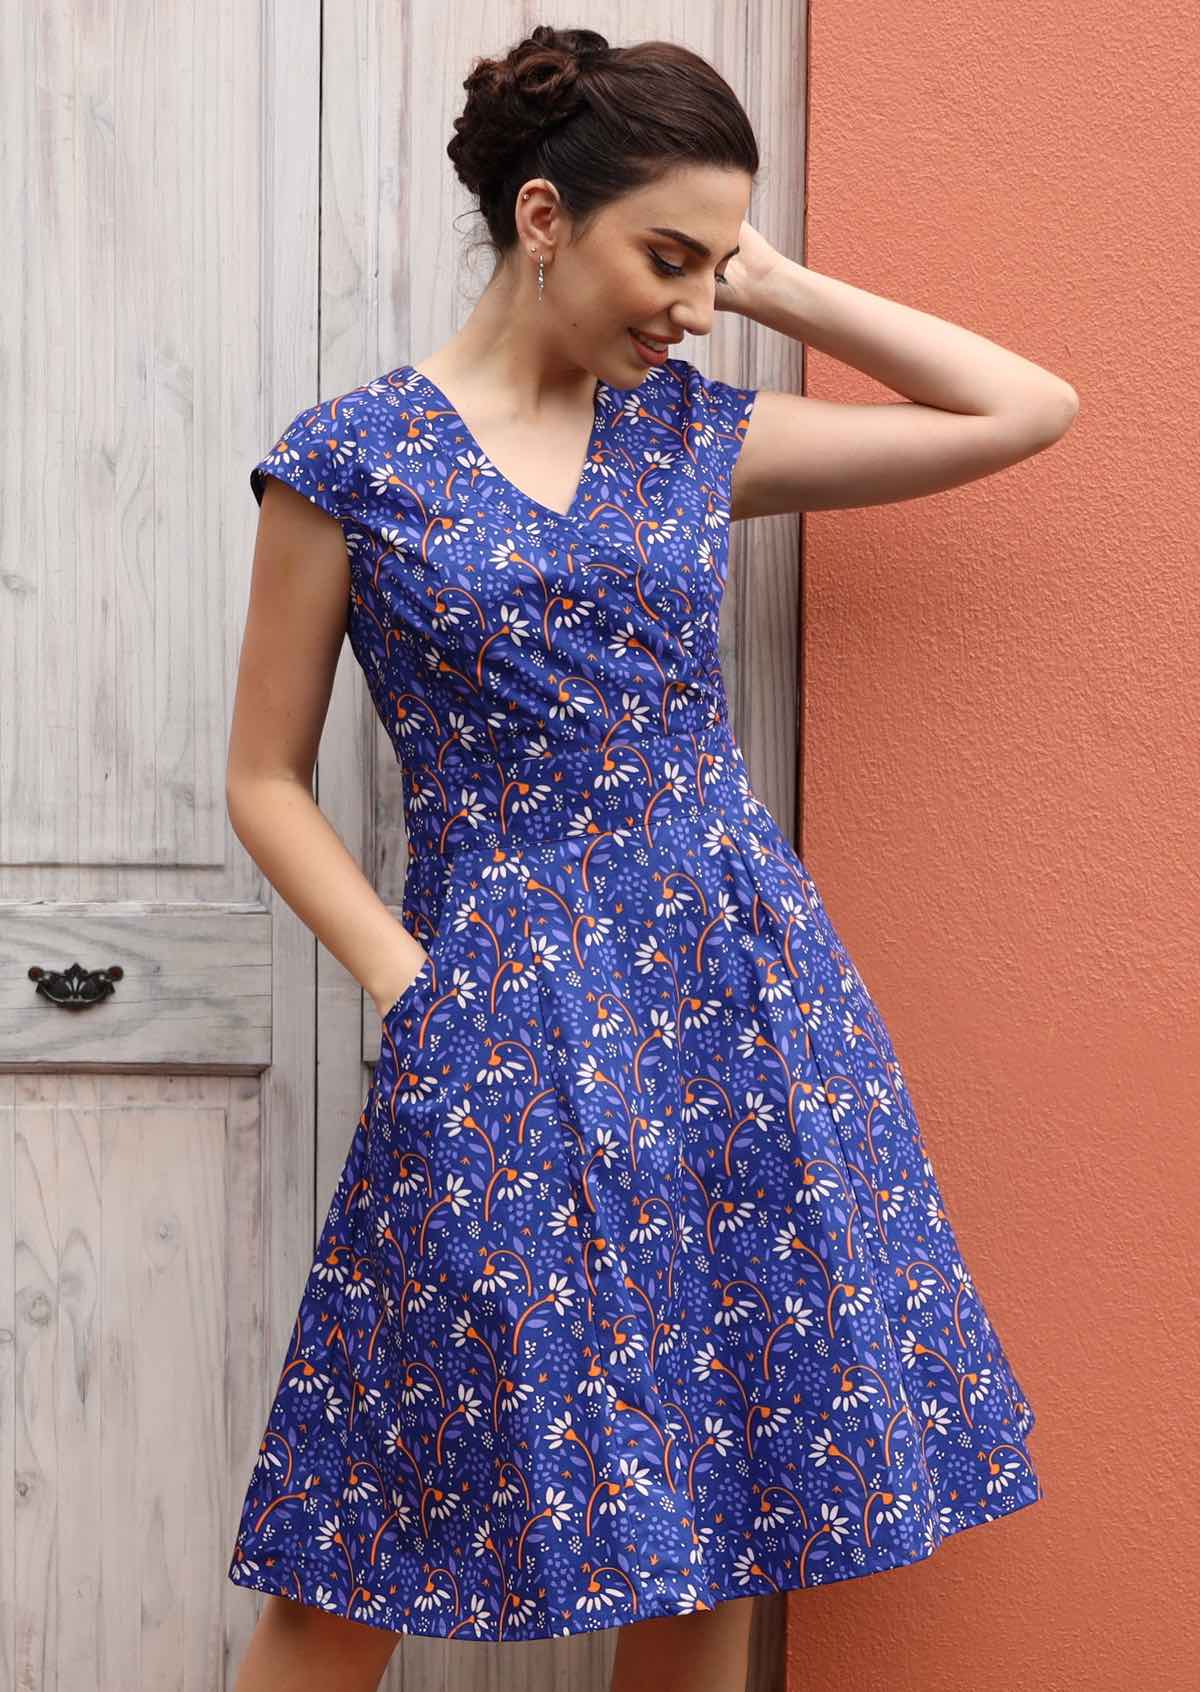 Retro cotton dress with cap sleeves and pockets